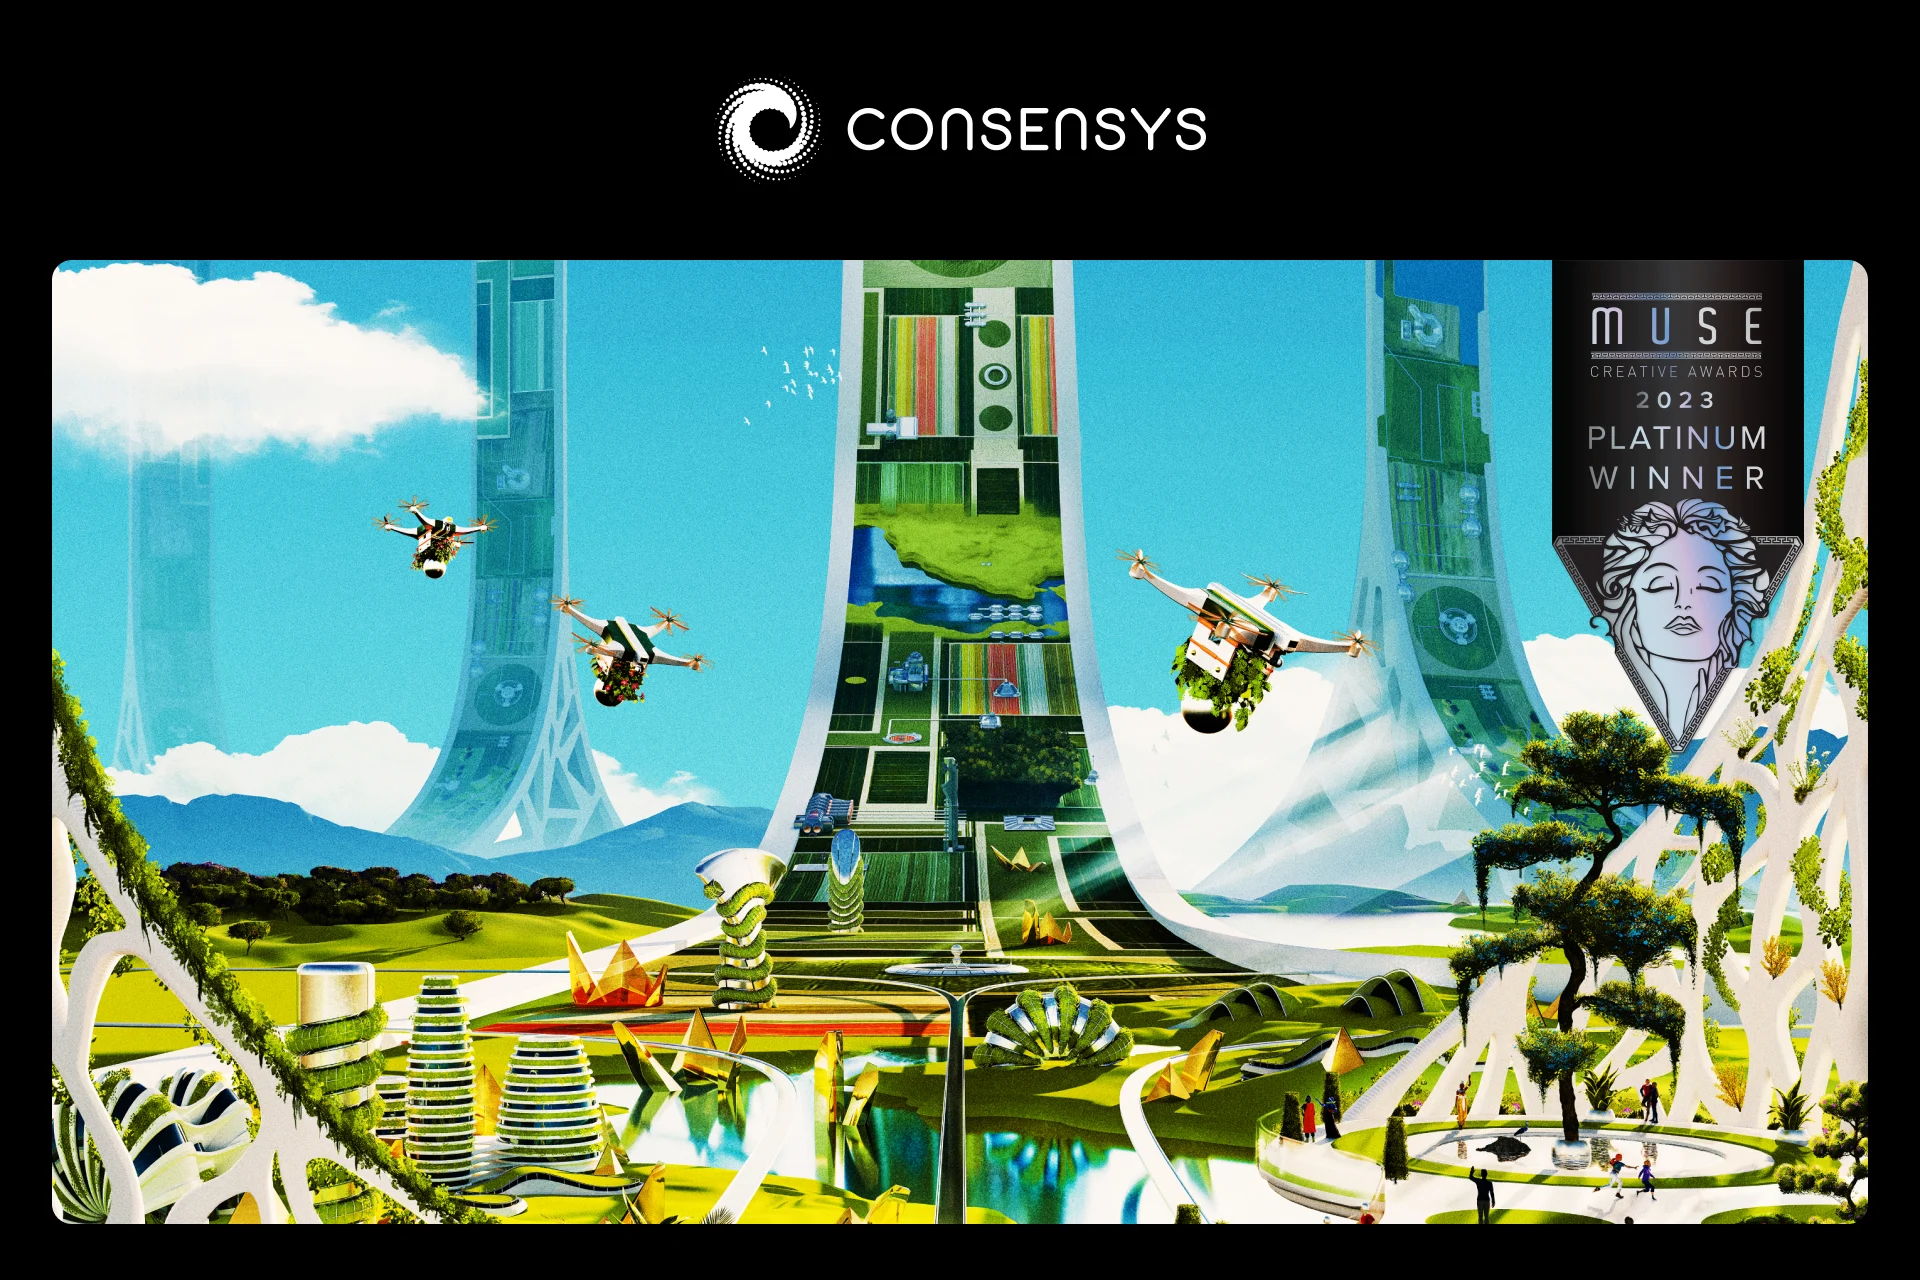 Image: Consensys’ Marketing Campaign celebrating The Merge Wins the MUSE Creative Award